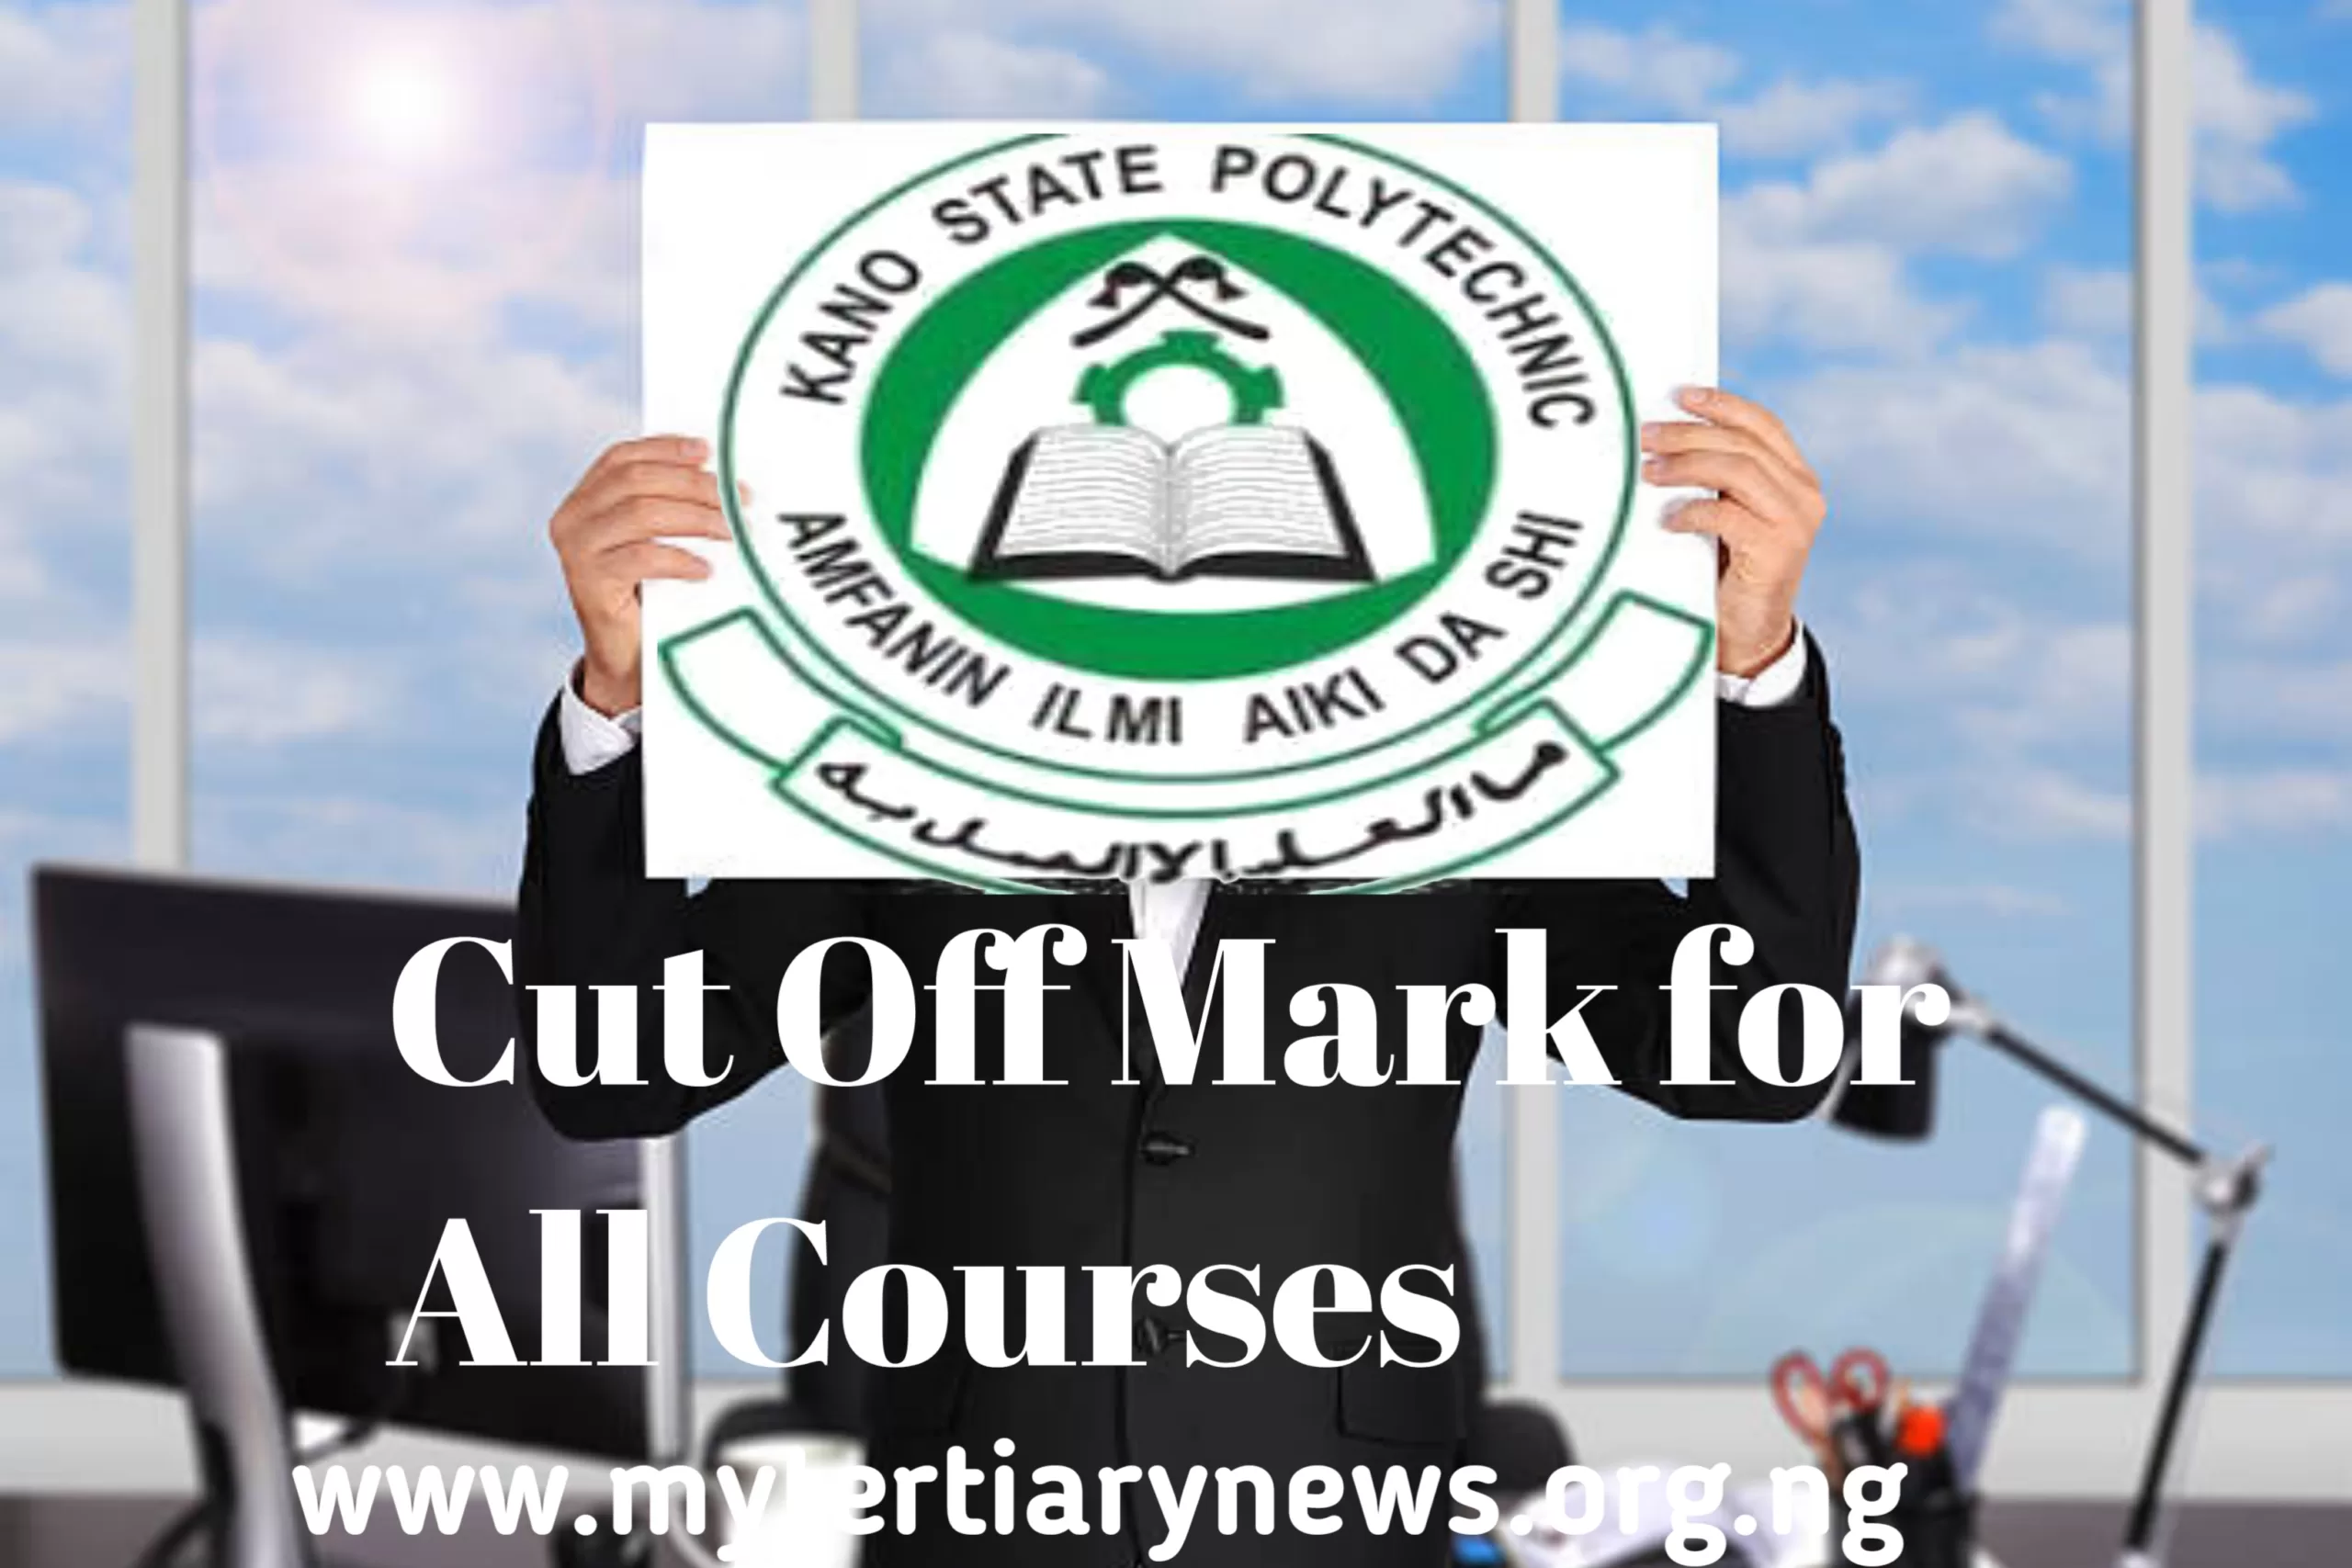 Kano State Polytechnic Image || Kano State Polytechnic Cut Off Mark for All Courses